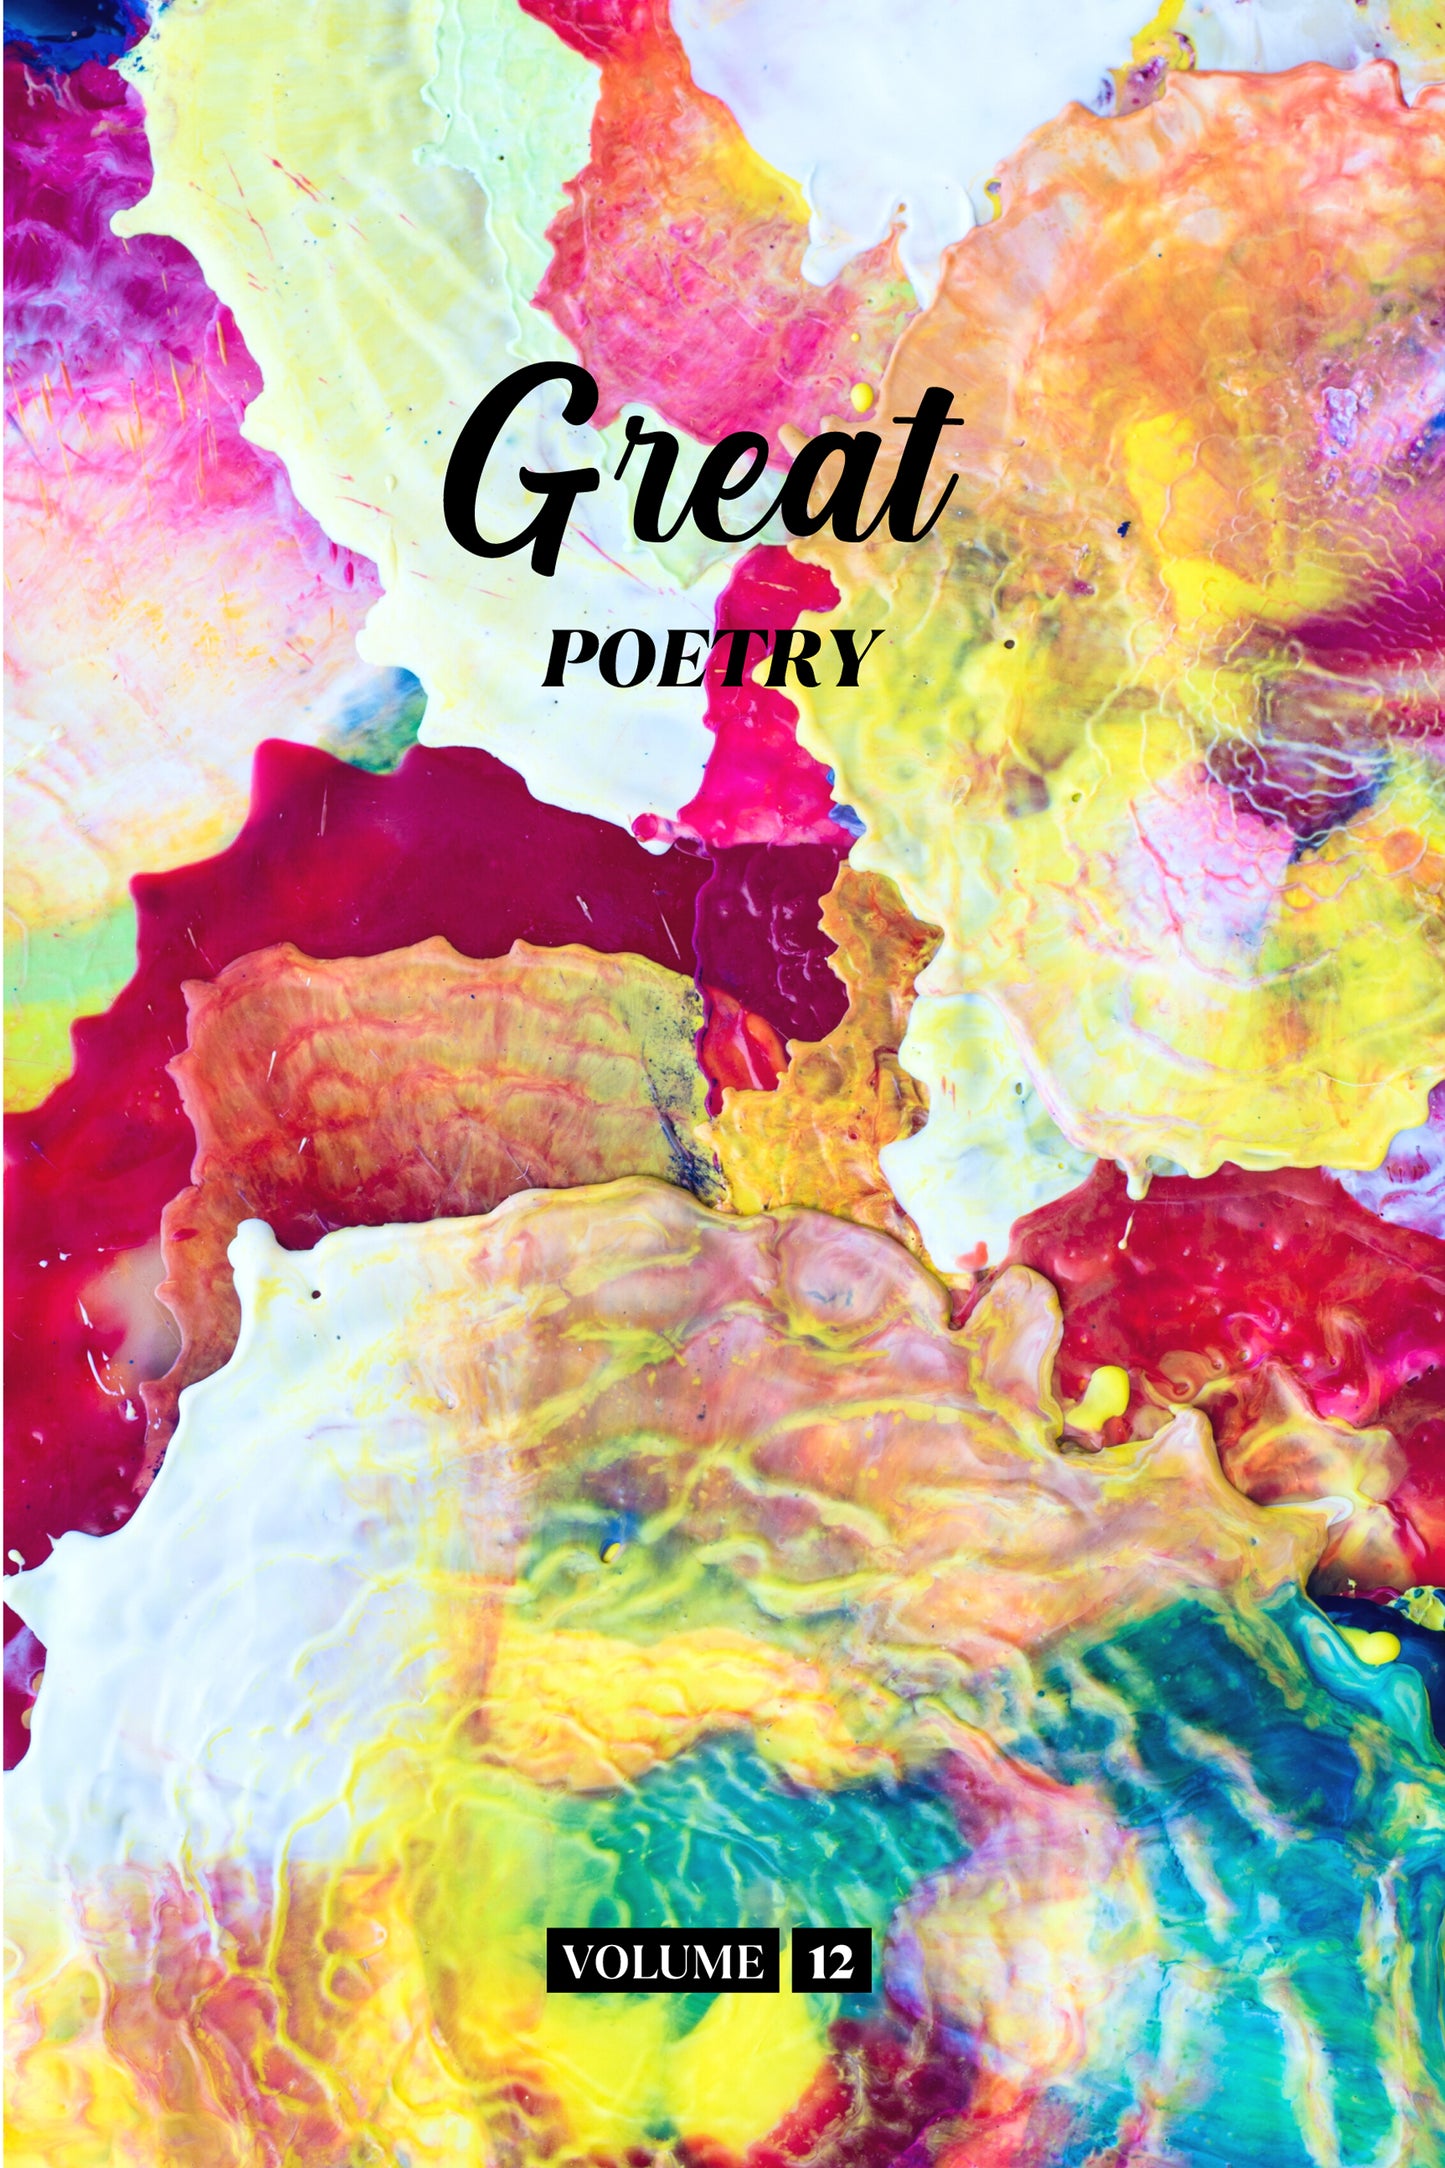 Great Poetry (Volume 12) - Physical Book